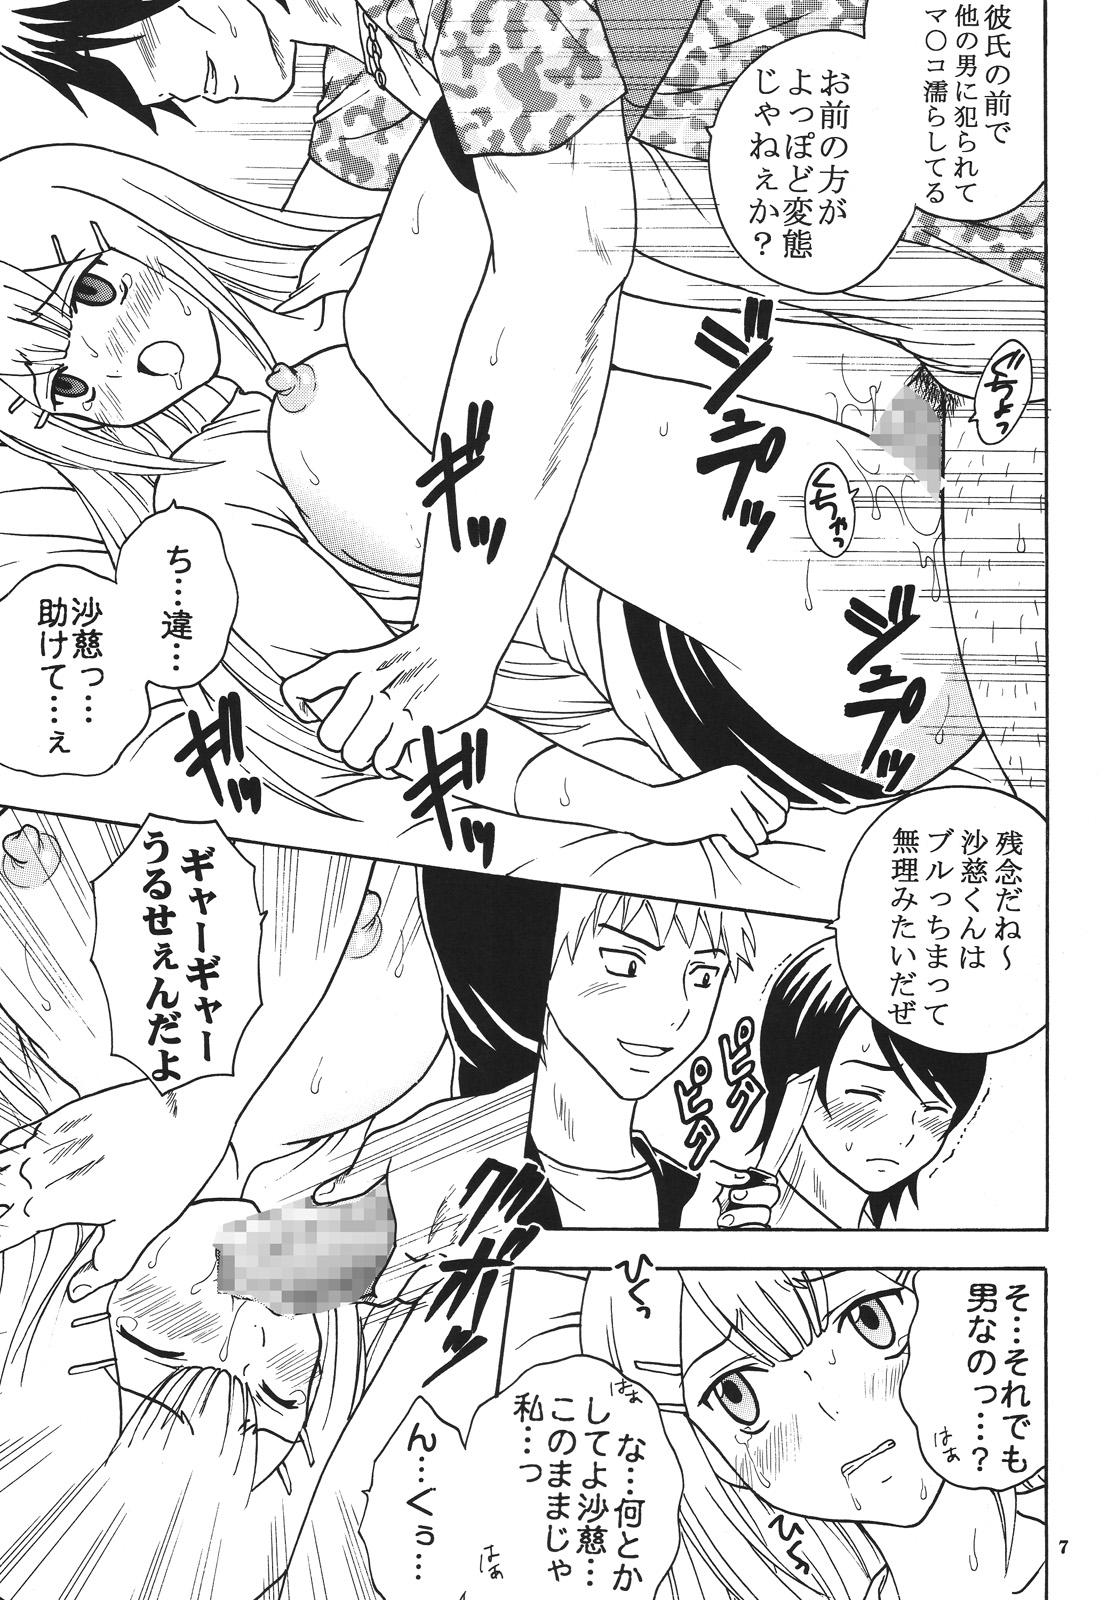 Passion COSMIC BREED 00 - Gundam 00 Jerking Off - Page 8